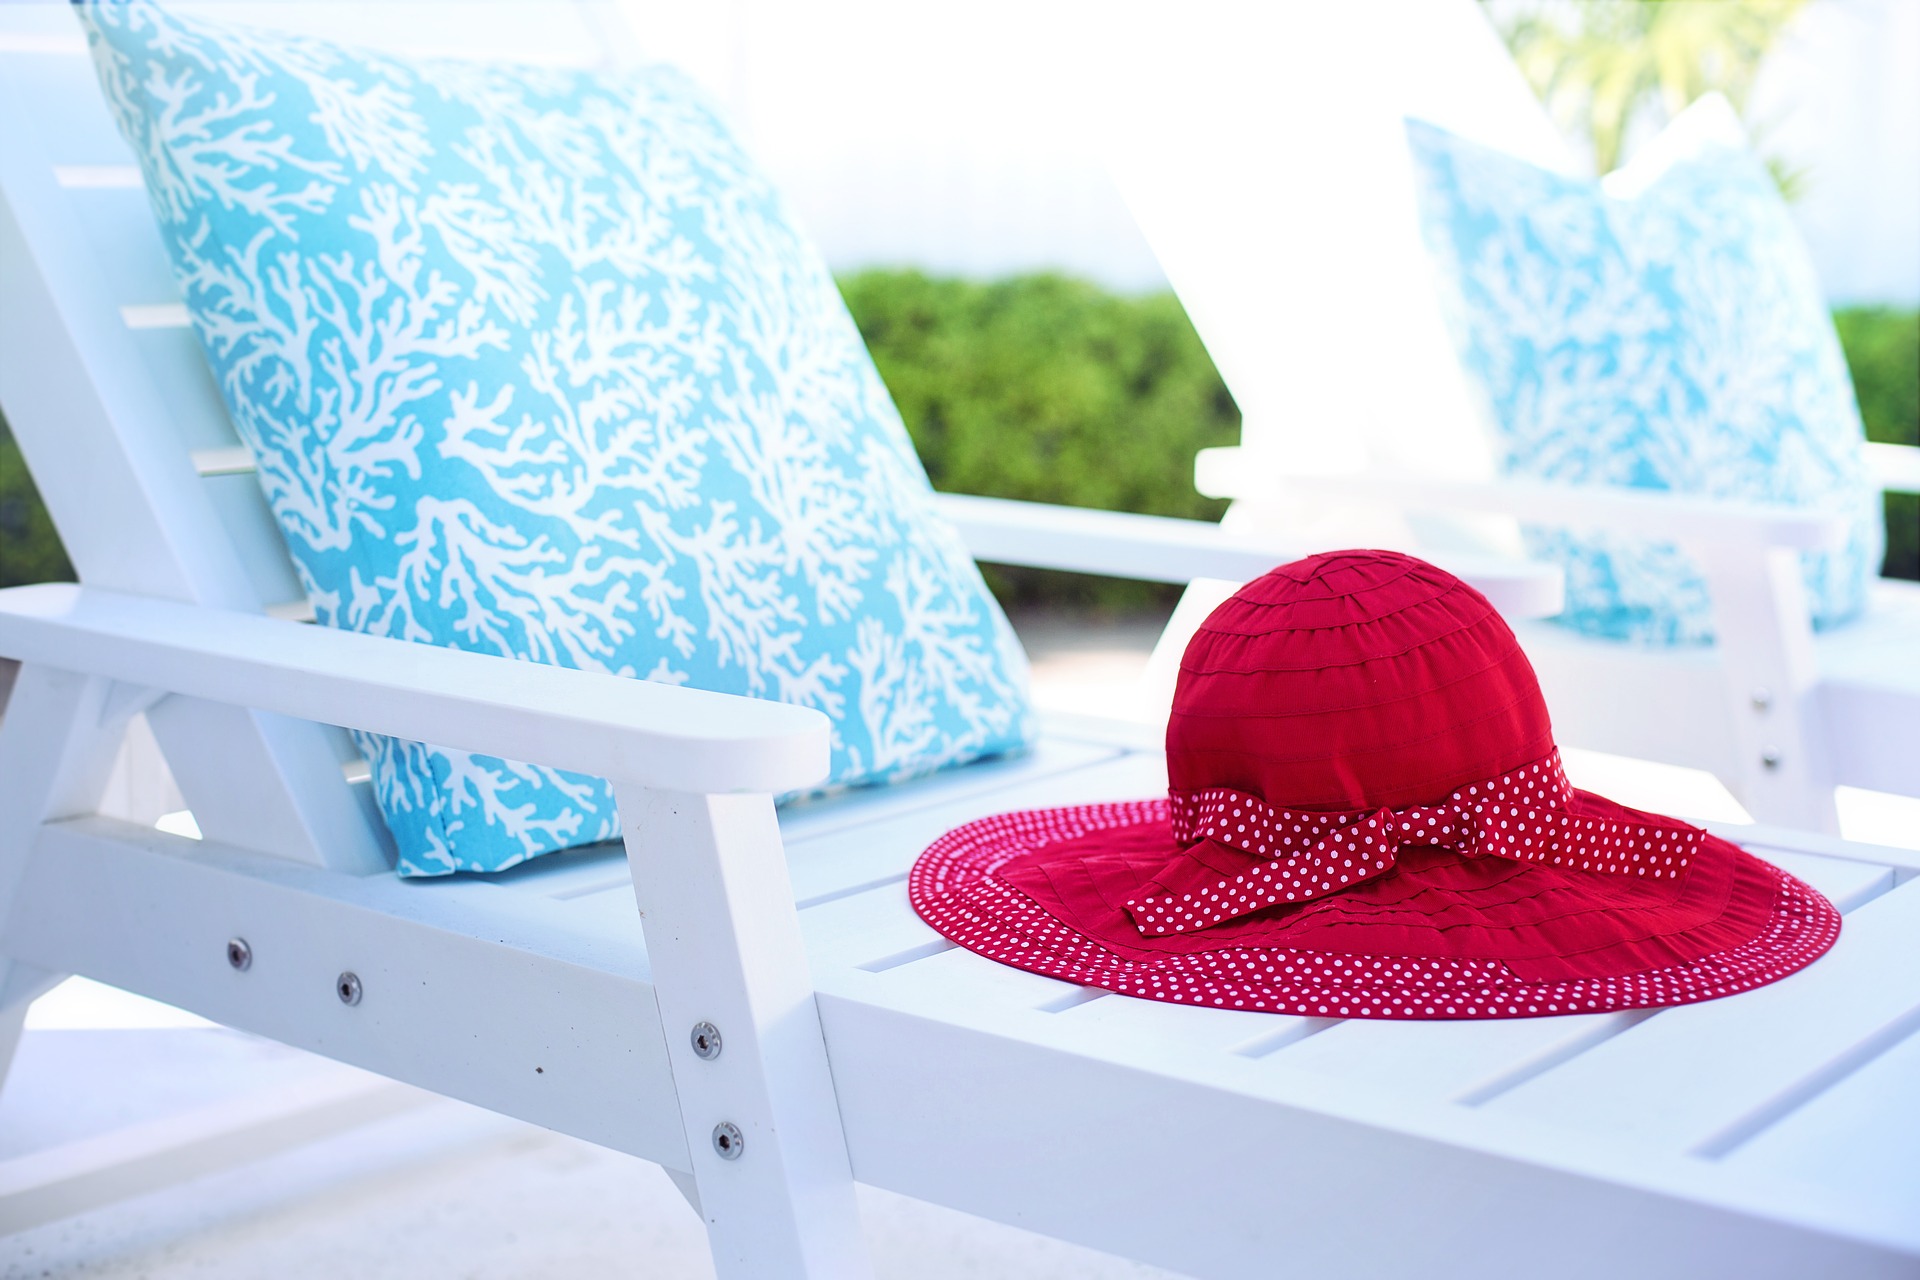 Stage your pool area with some lounge chairs